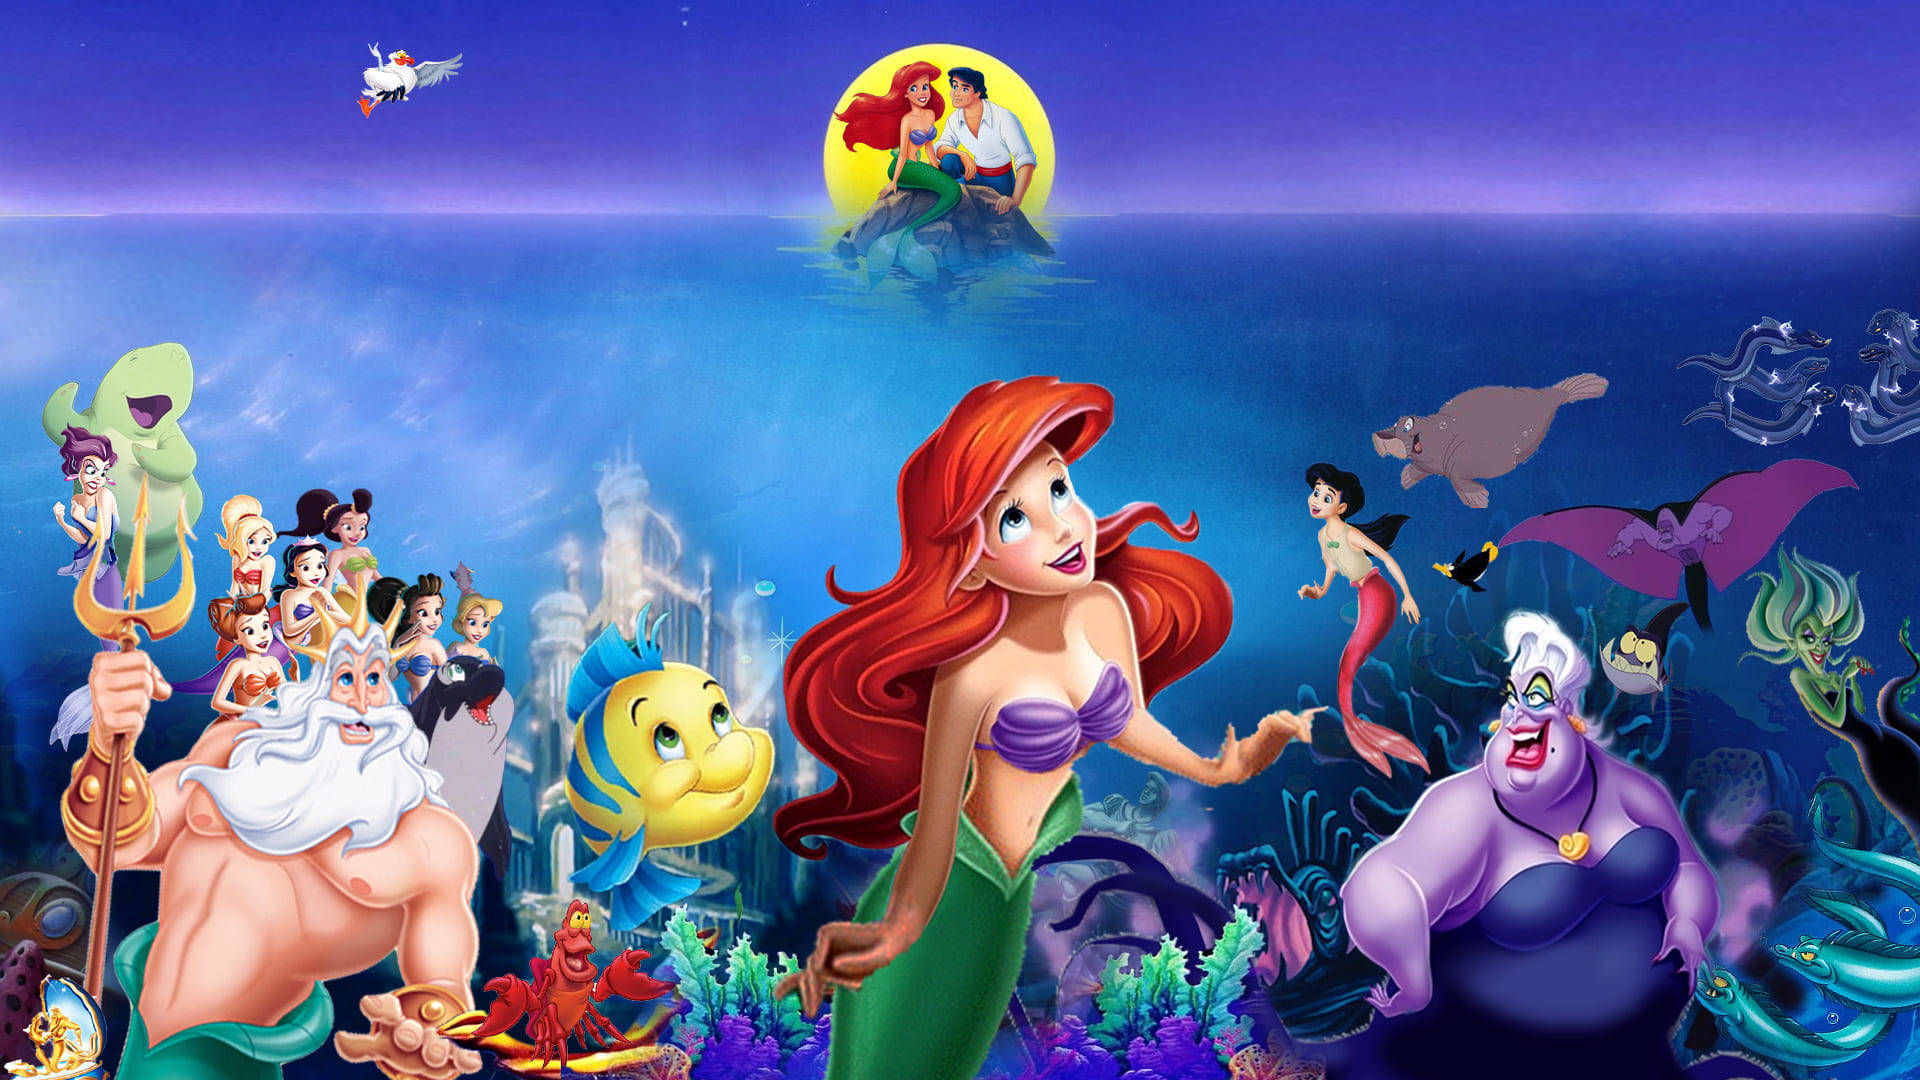 Caption: Disney's Ariel Poses with The Little Mermaid Movie Cast Wallpaper